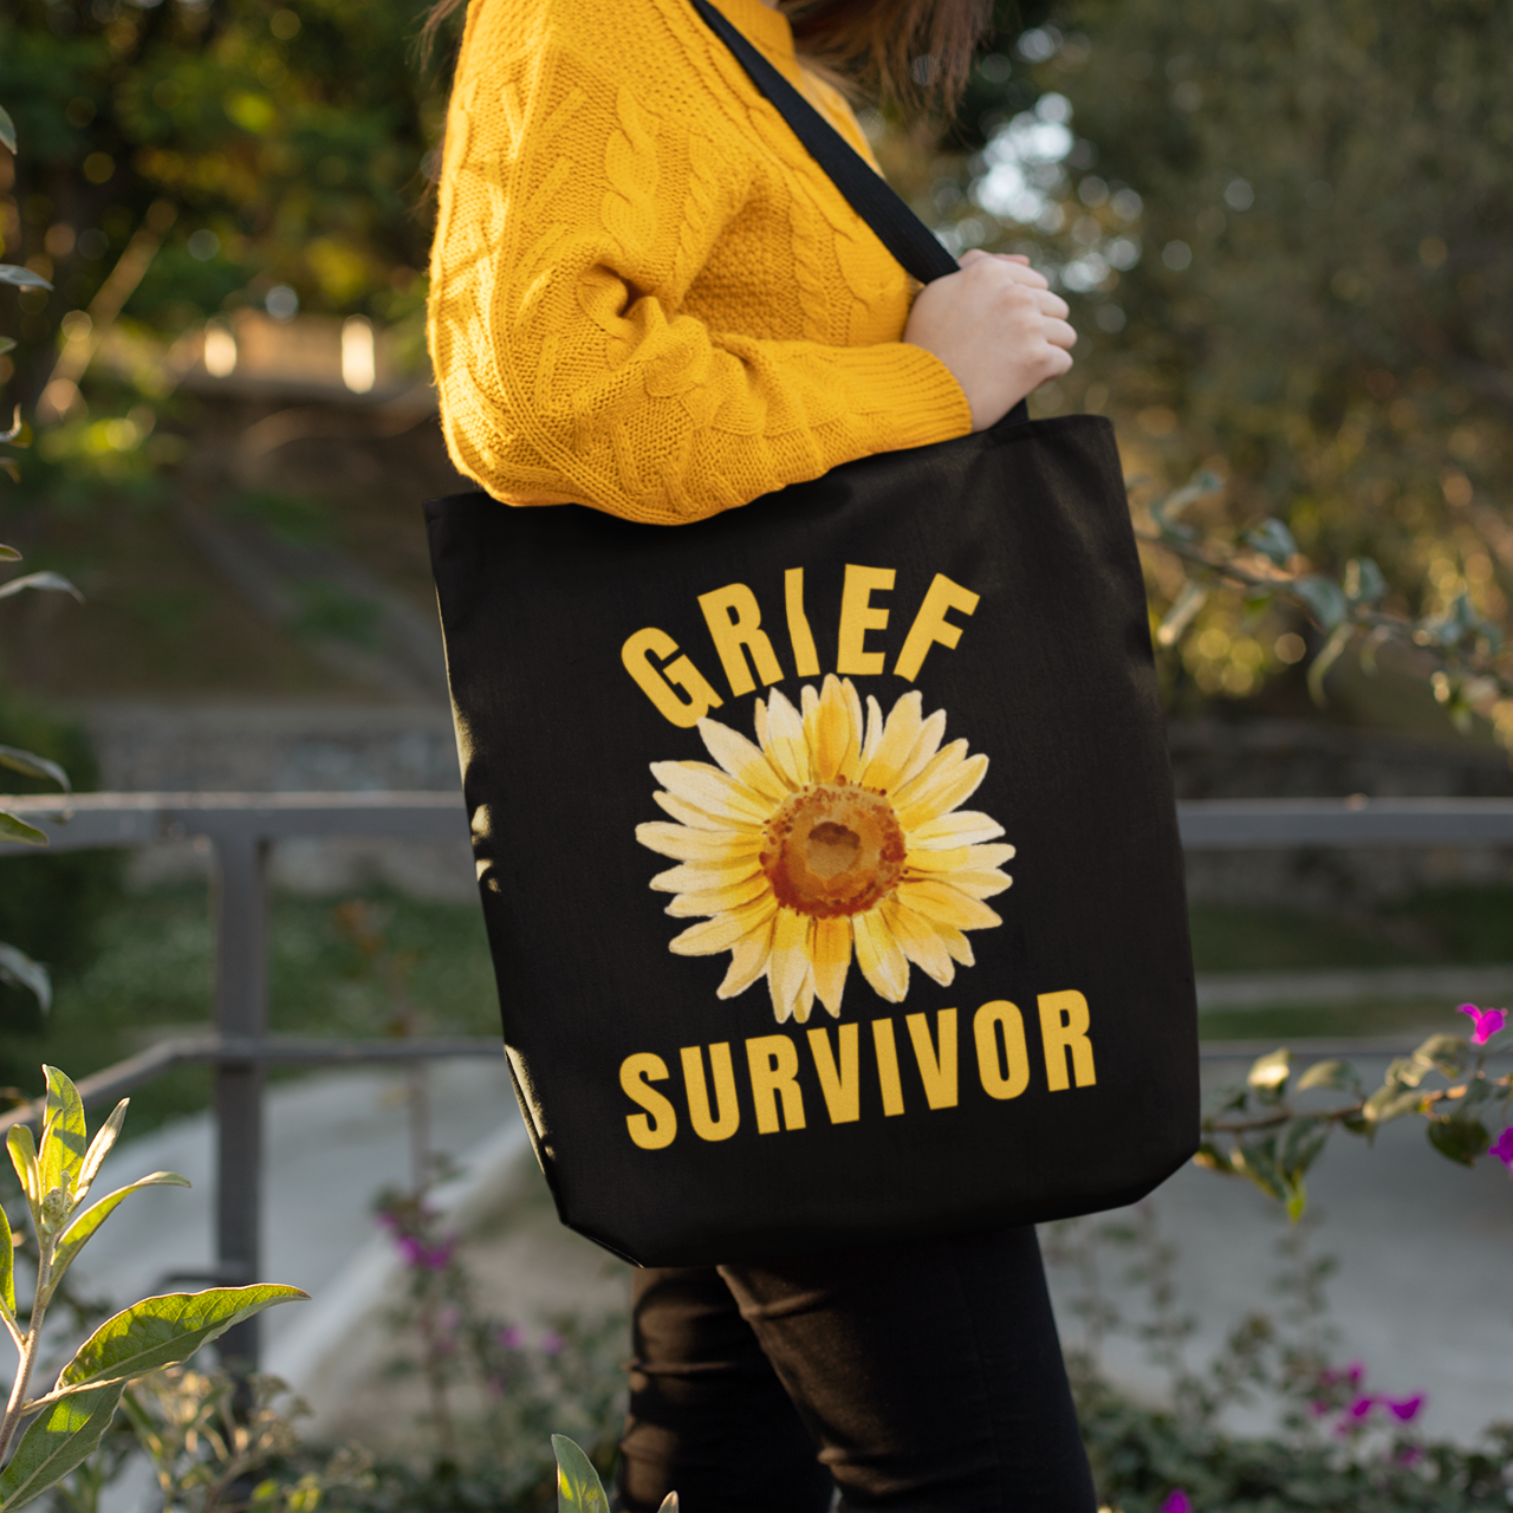 Black Grief Survivor Tote bag. Ideal for carrying those important documents needed when handling the details for a lost loved one. Or simply a carryall for running errands or holding books, with a message of comfort and resilience. 